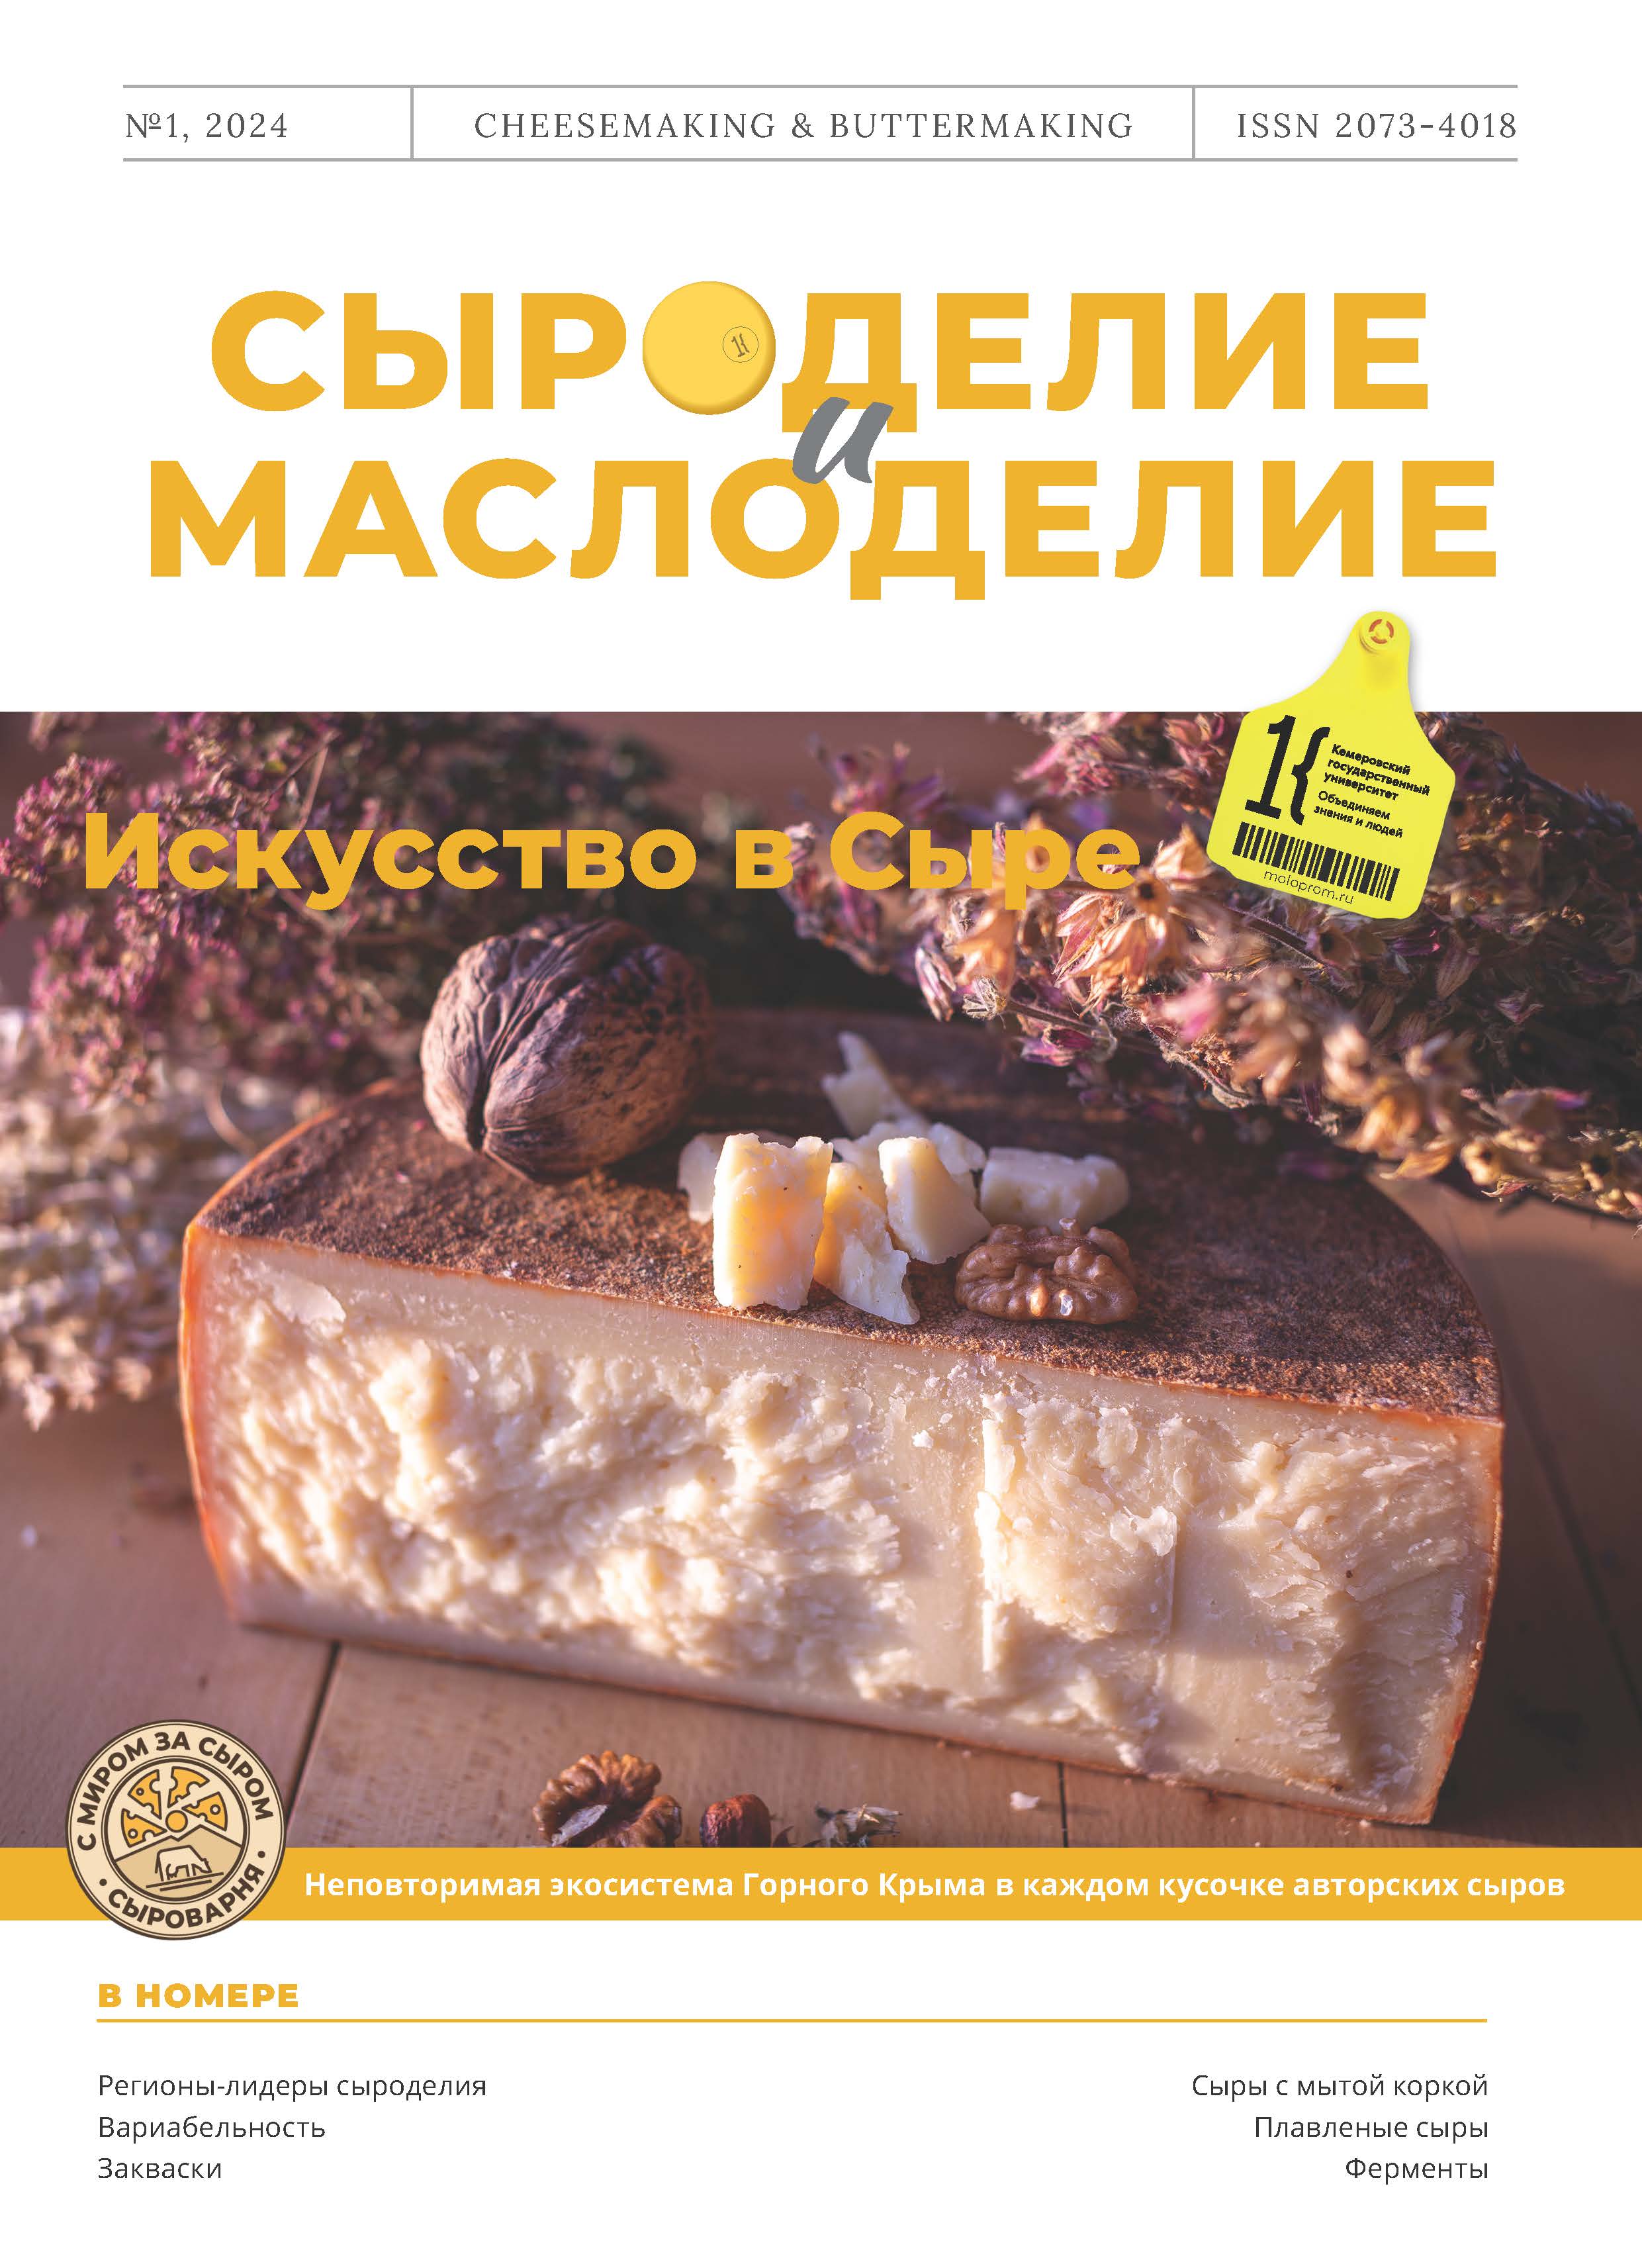                         Cheese-Making Regions: From Local Cheese Varieties to Regional Brands
            